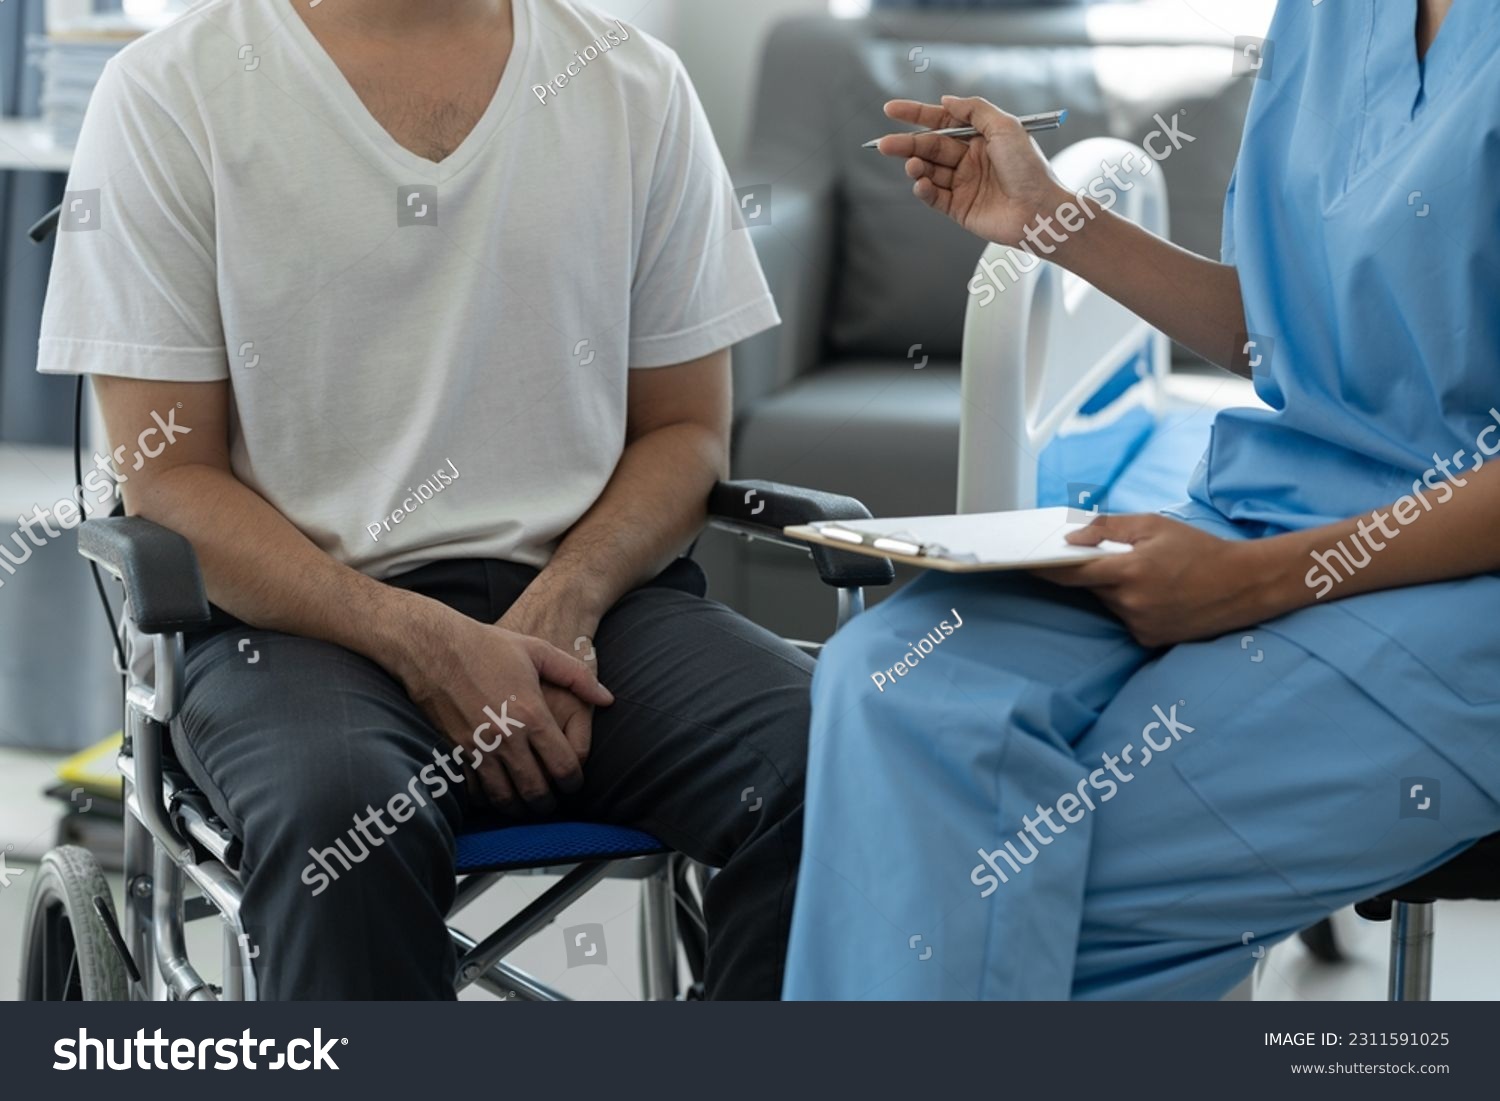 Psychologists or physiotherapists give advice and advice on health care lifestyles for male patients in wheelchairs who have pain in the genital area. and used in everyday life, health insurance. #2311591025